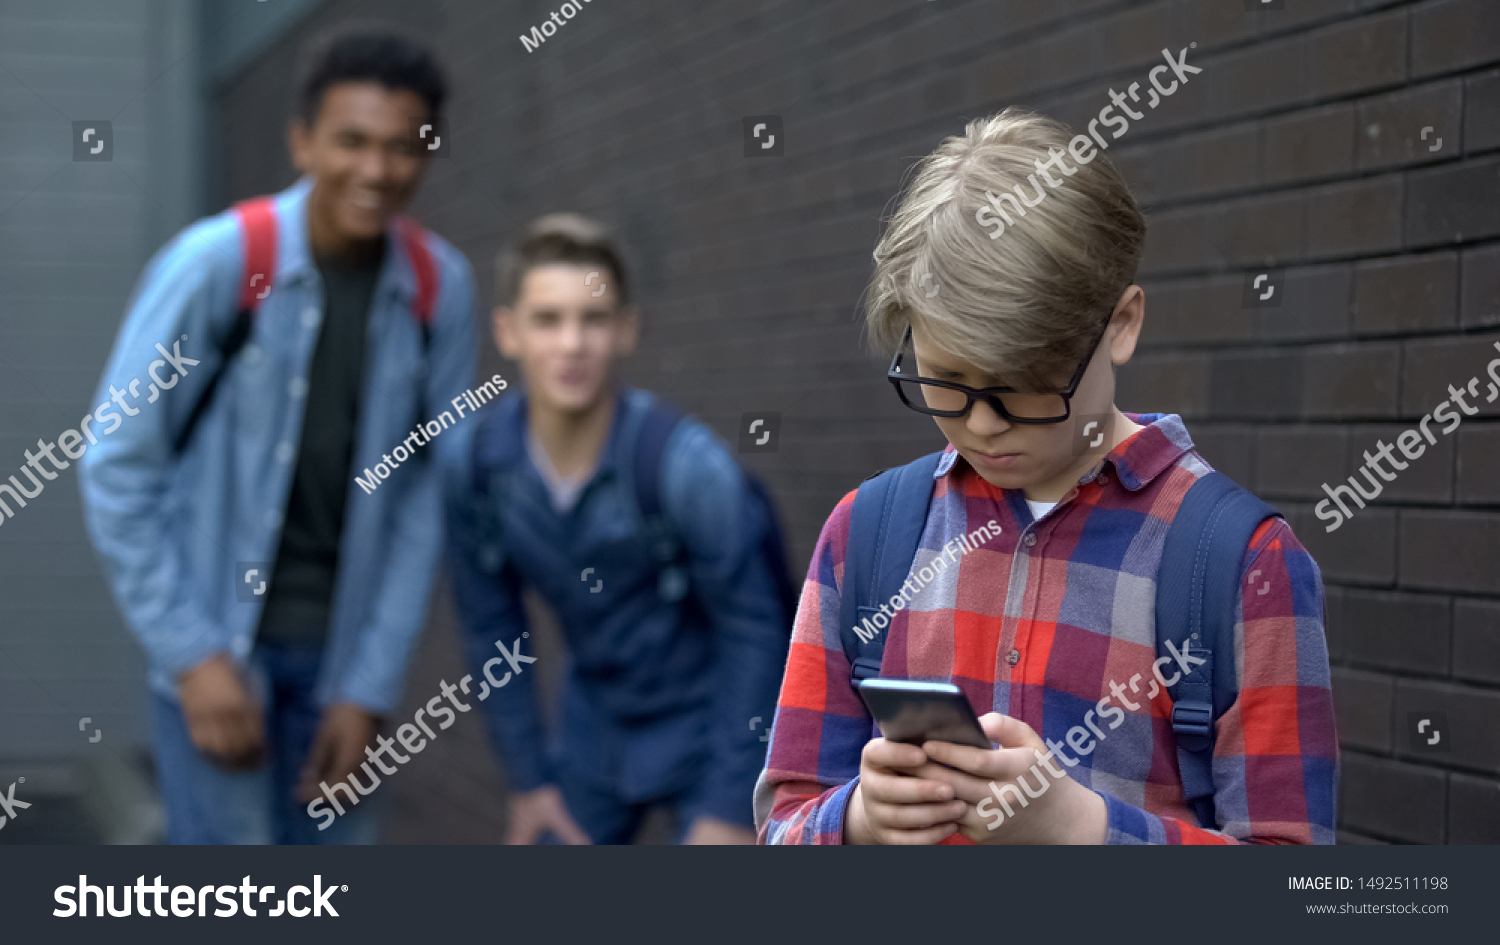 Junior student reading offensive post in phone, boys mock behind, cyberbullying #1492511198